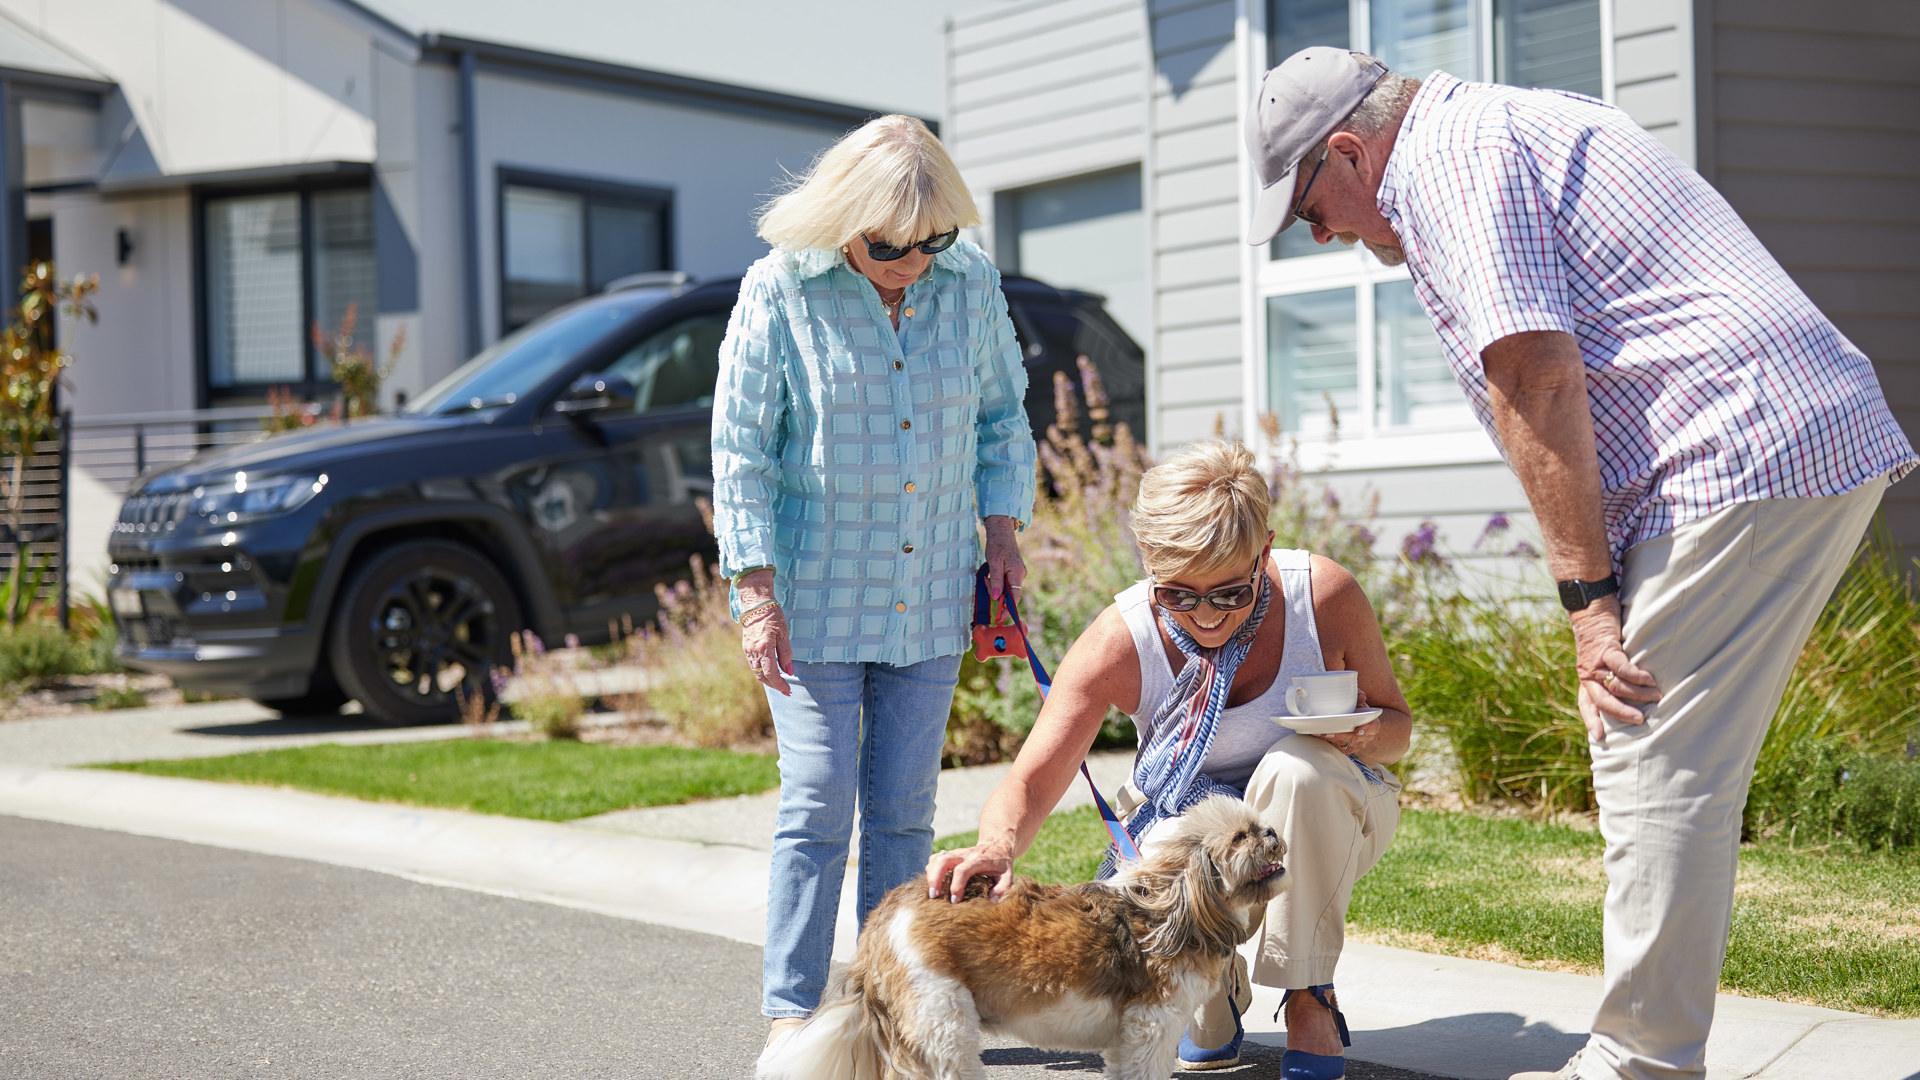 Friends meet in the streets with their dog in a Stockland Halcyon community